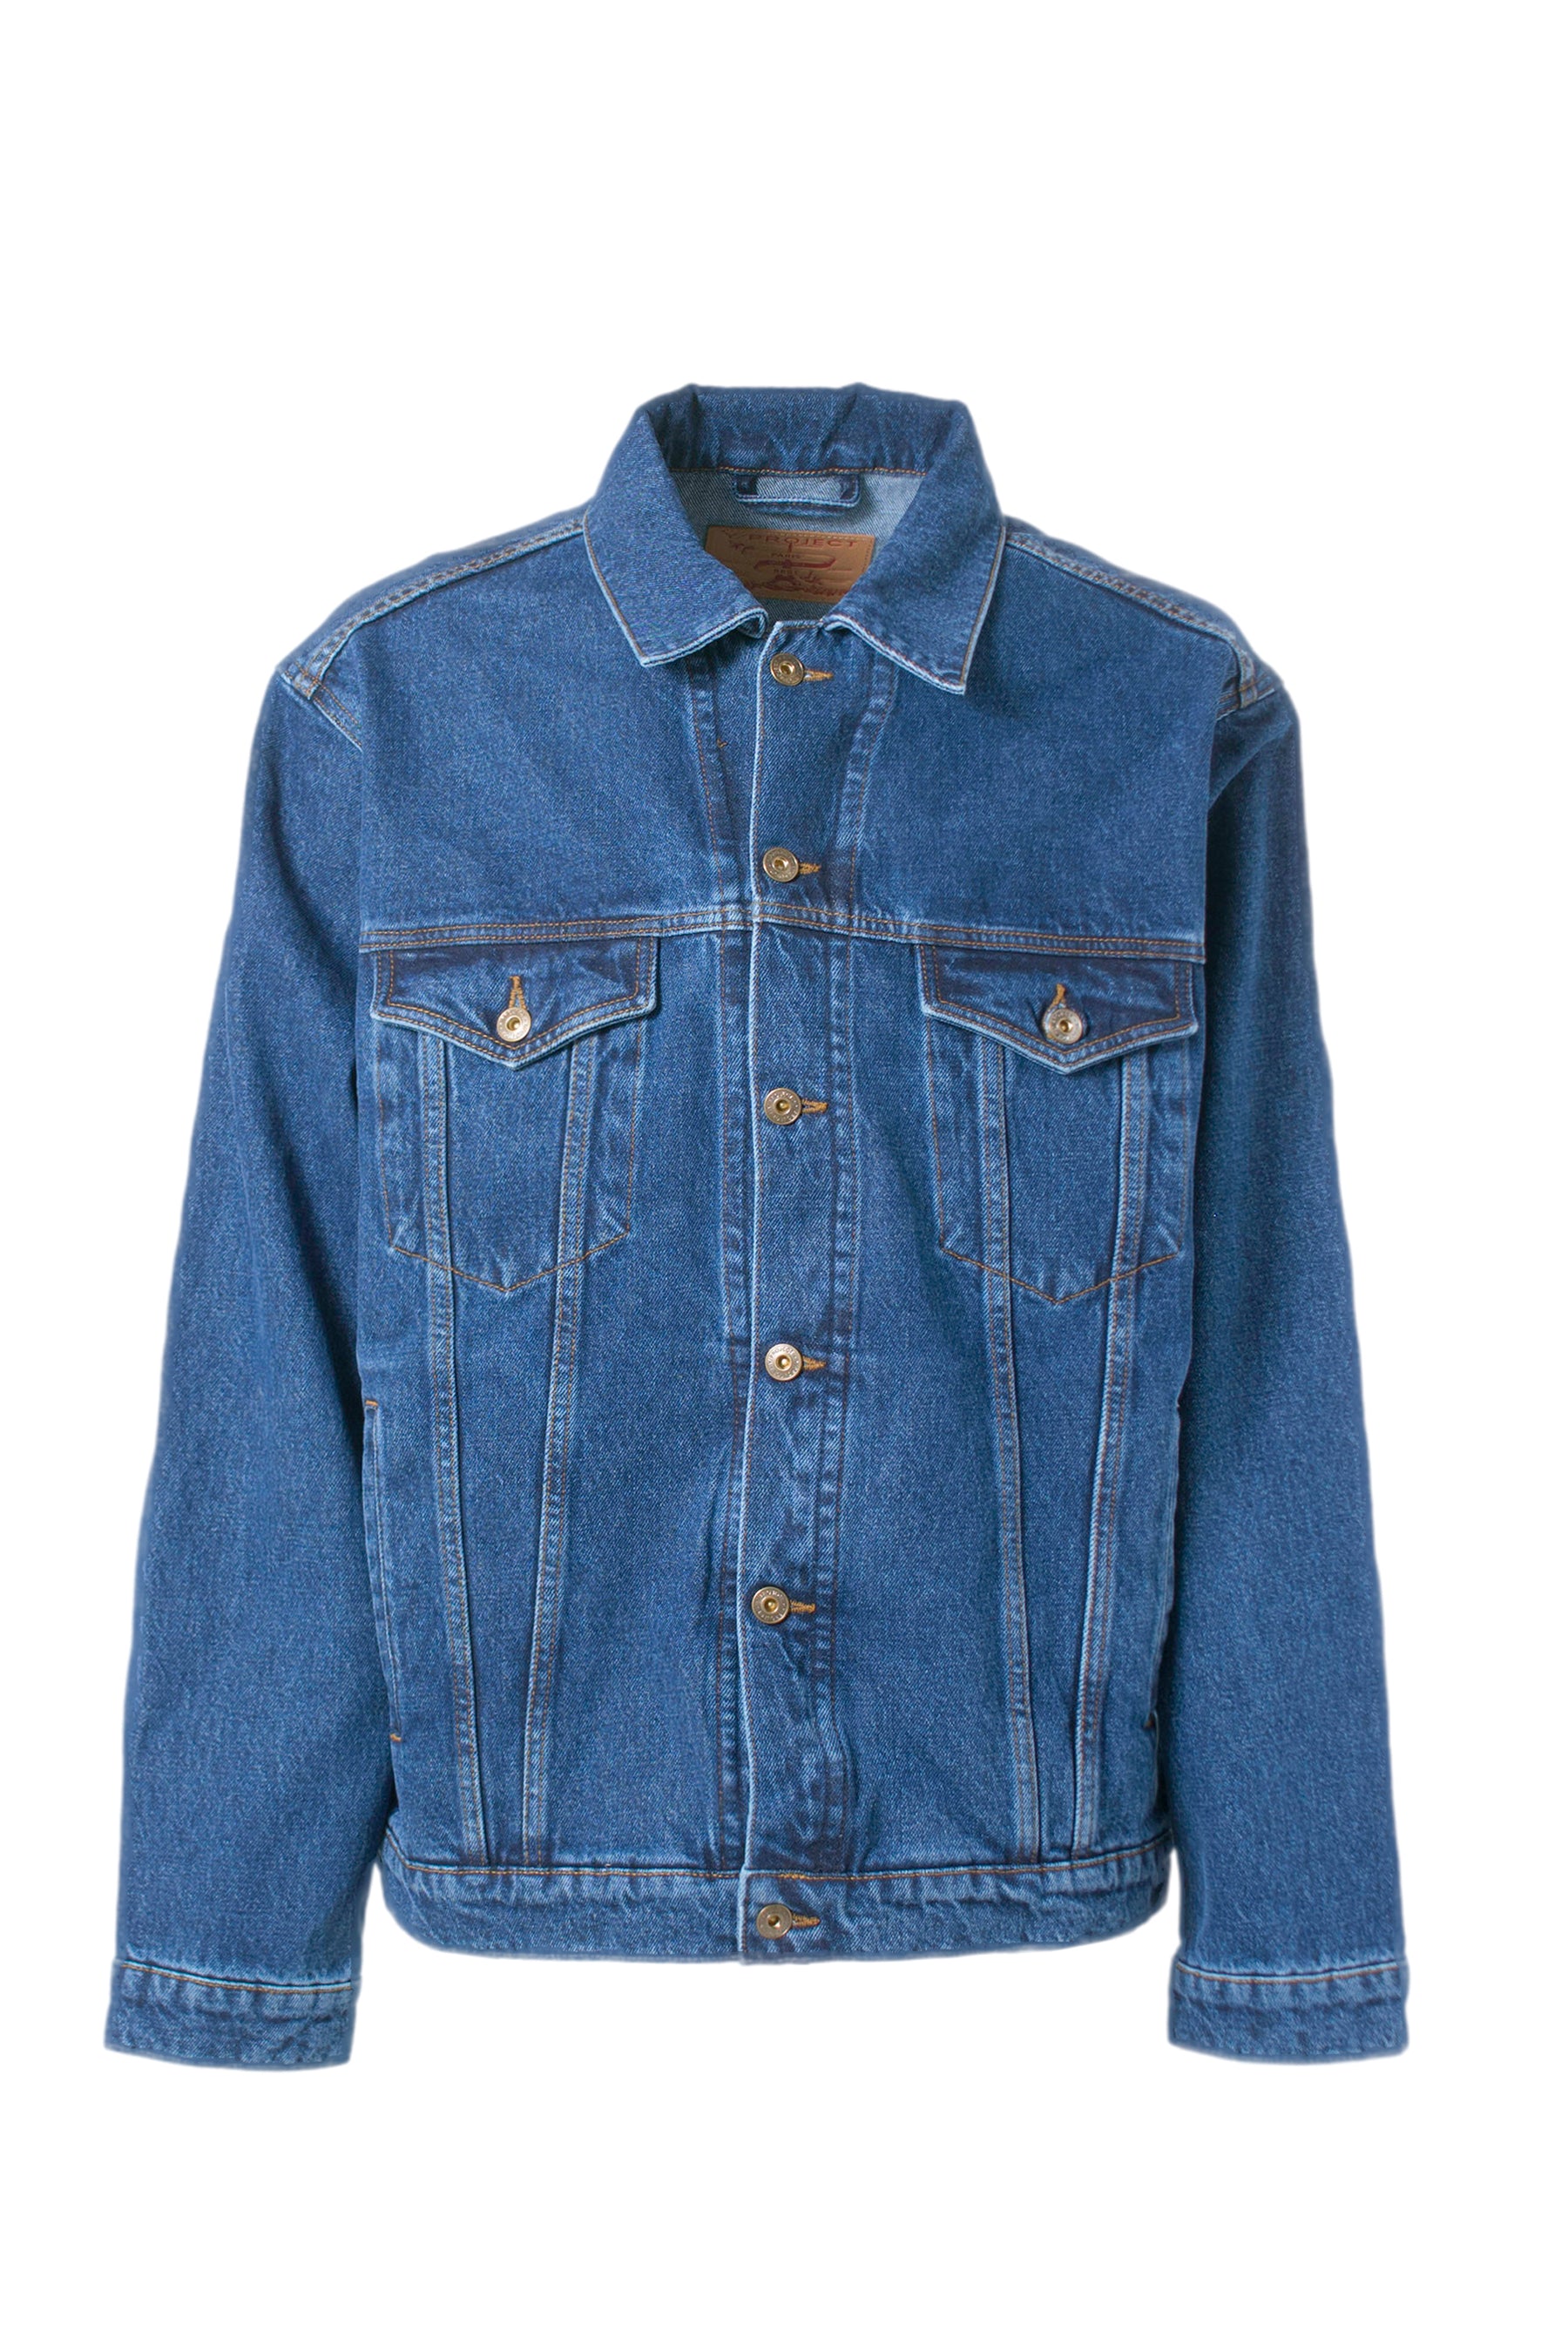 Y/Project ワイプロジェクト SS23 CLASSIC WIRE DENIM JACKET / NVY ...